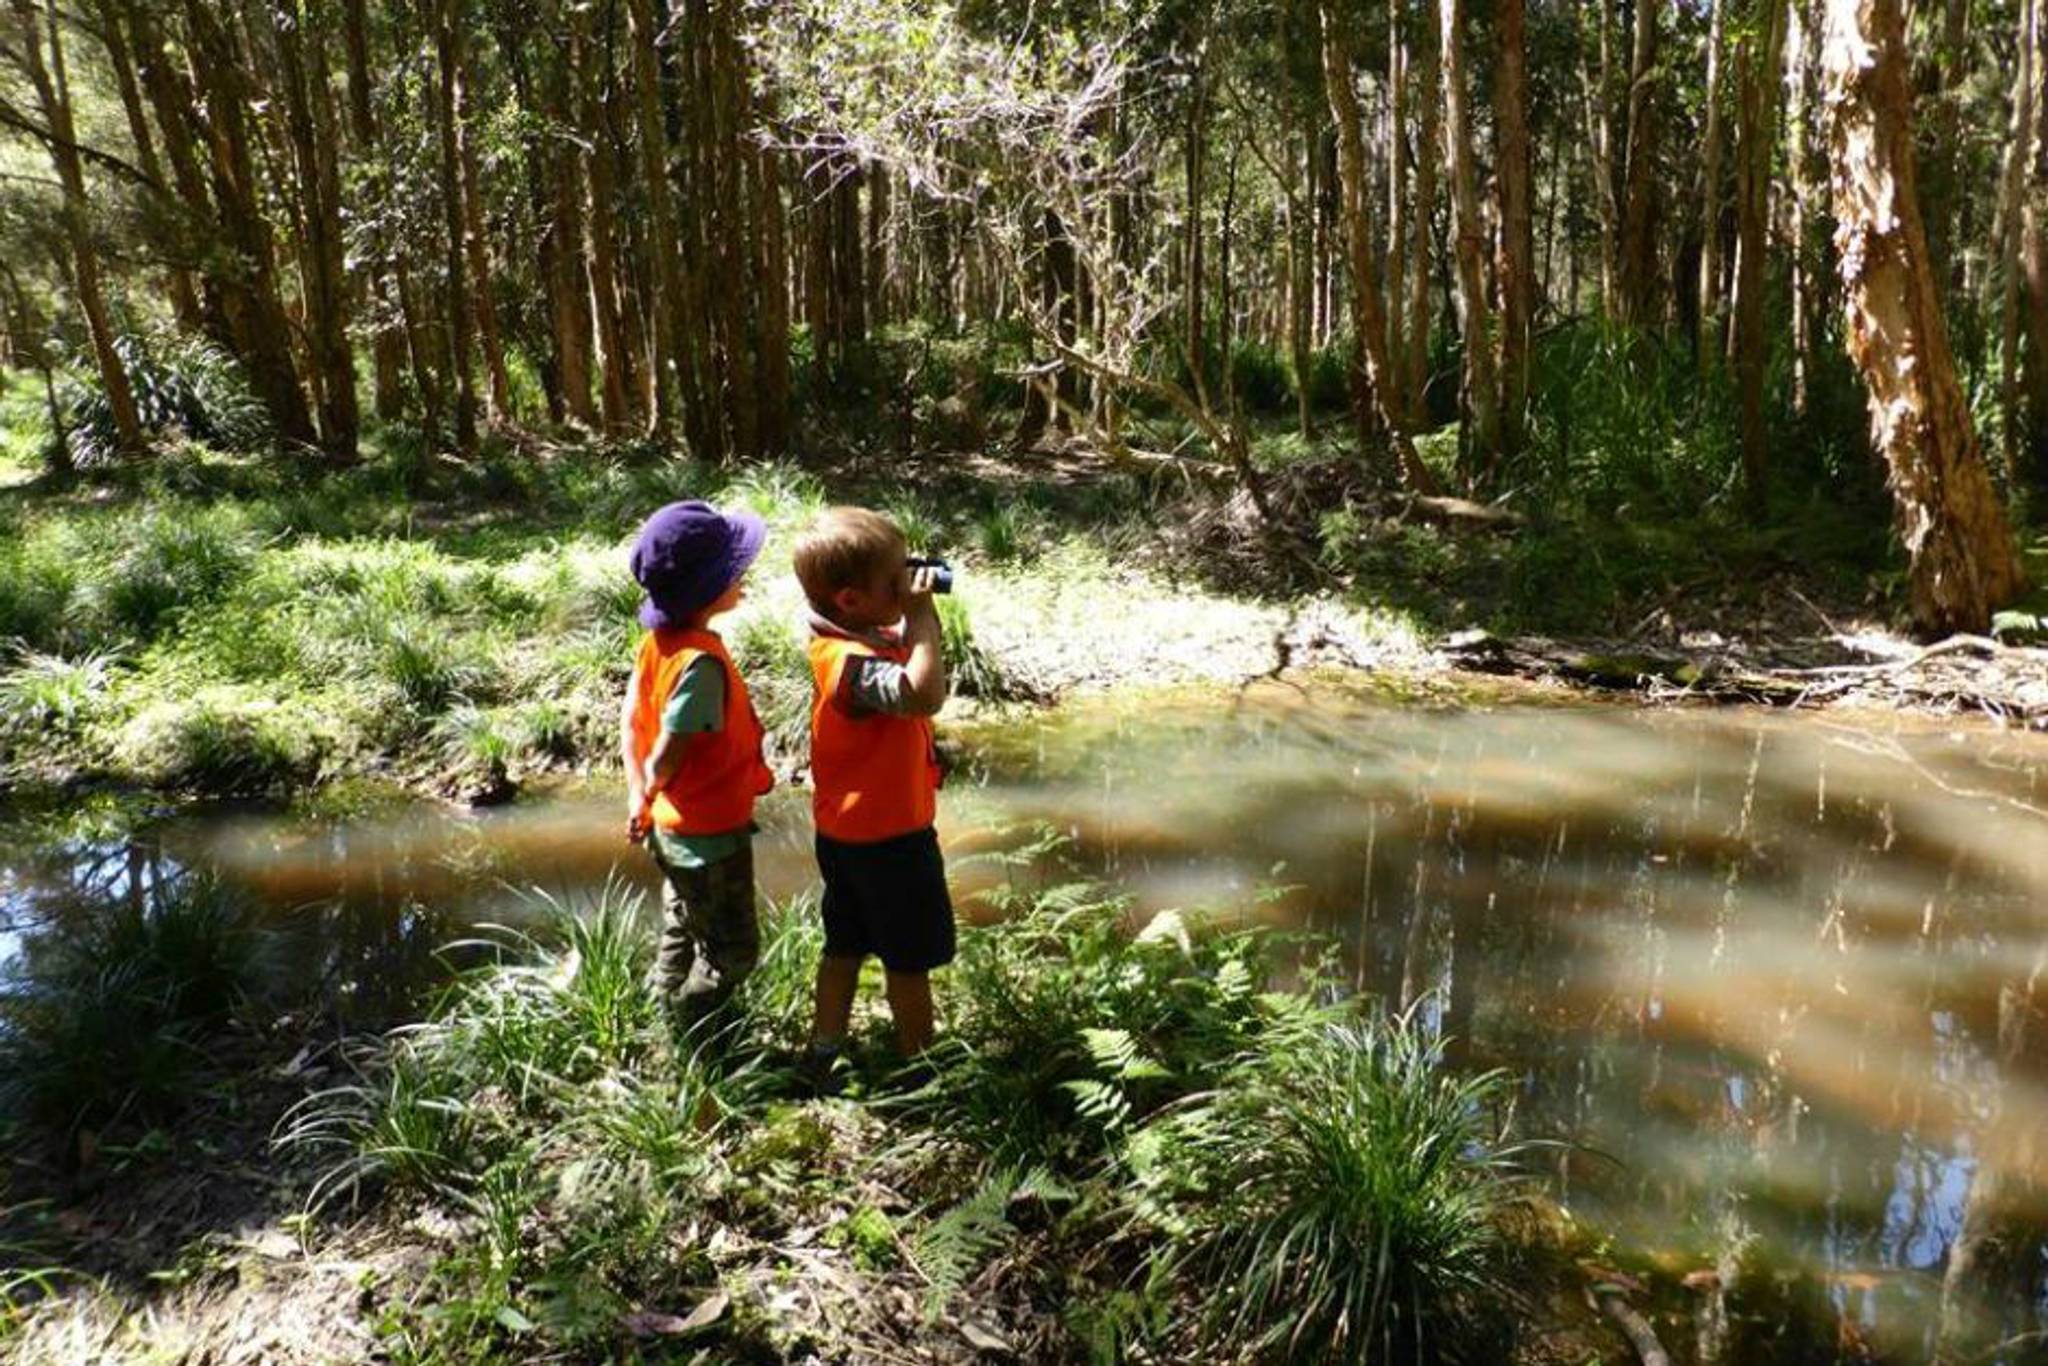 Outdoor classes help kids connect with nature